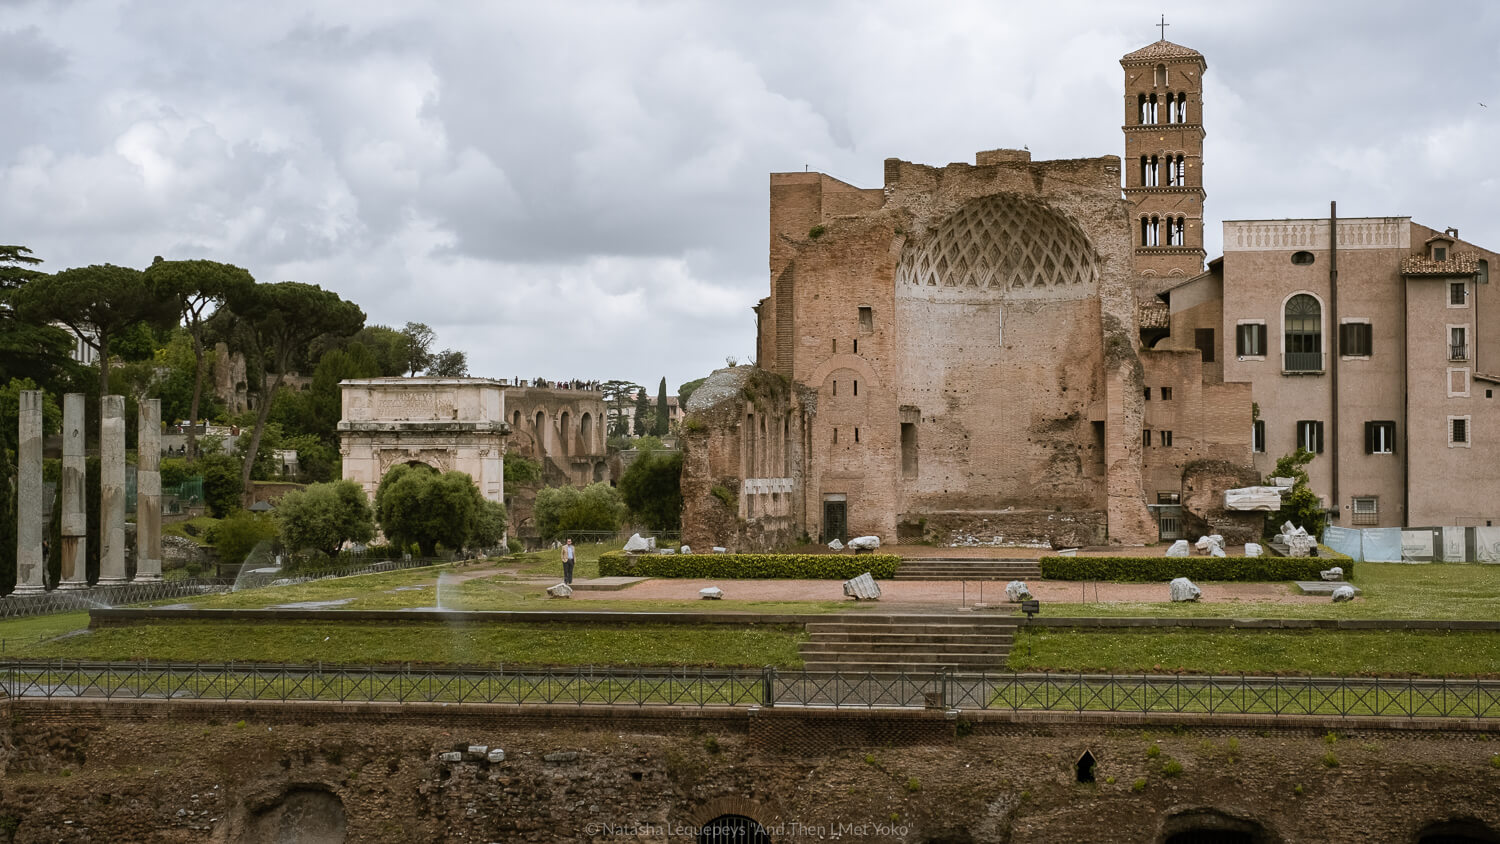 The Temple of Venus in Rome, Italy. Travel photography and guide by © Natasha Lequepeys for "And Then I Met Yoko". #rome #italy #travelblog #travelphotography